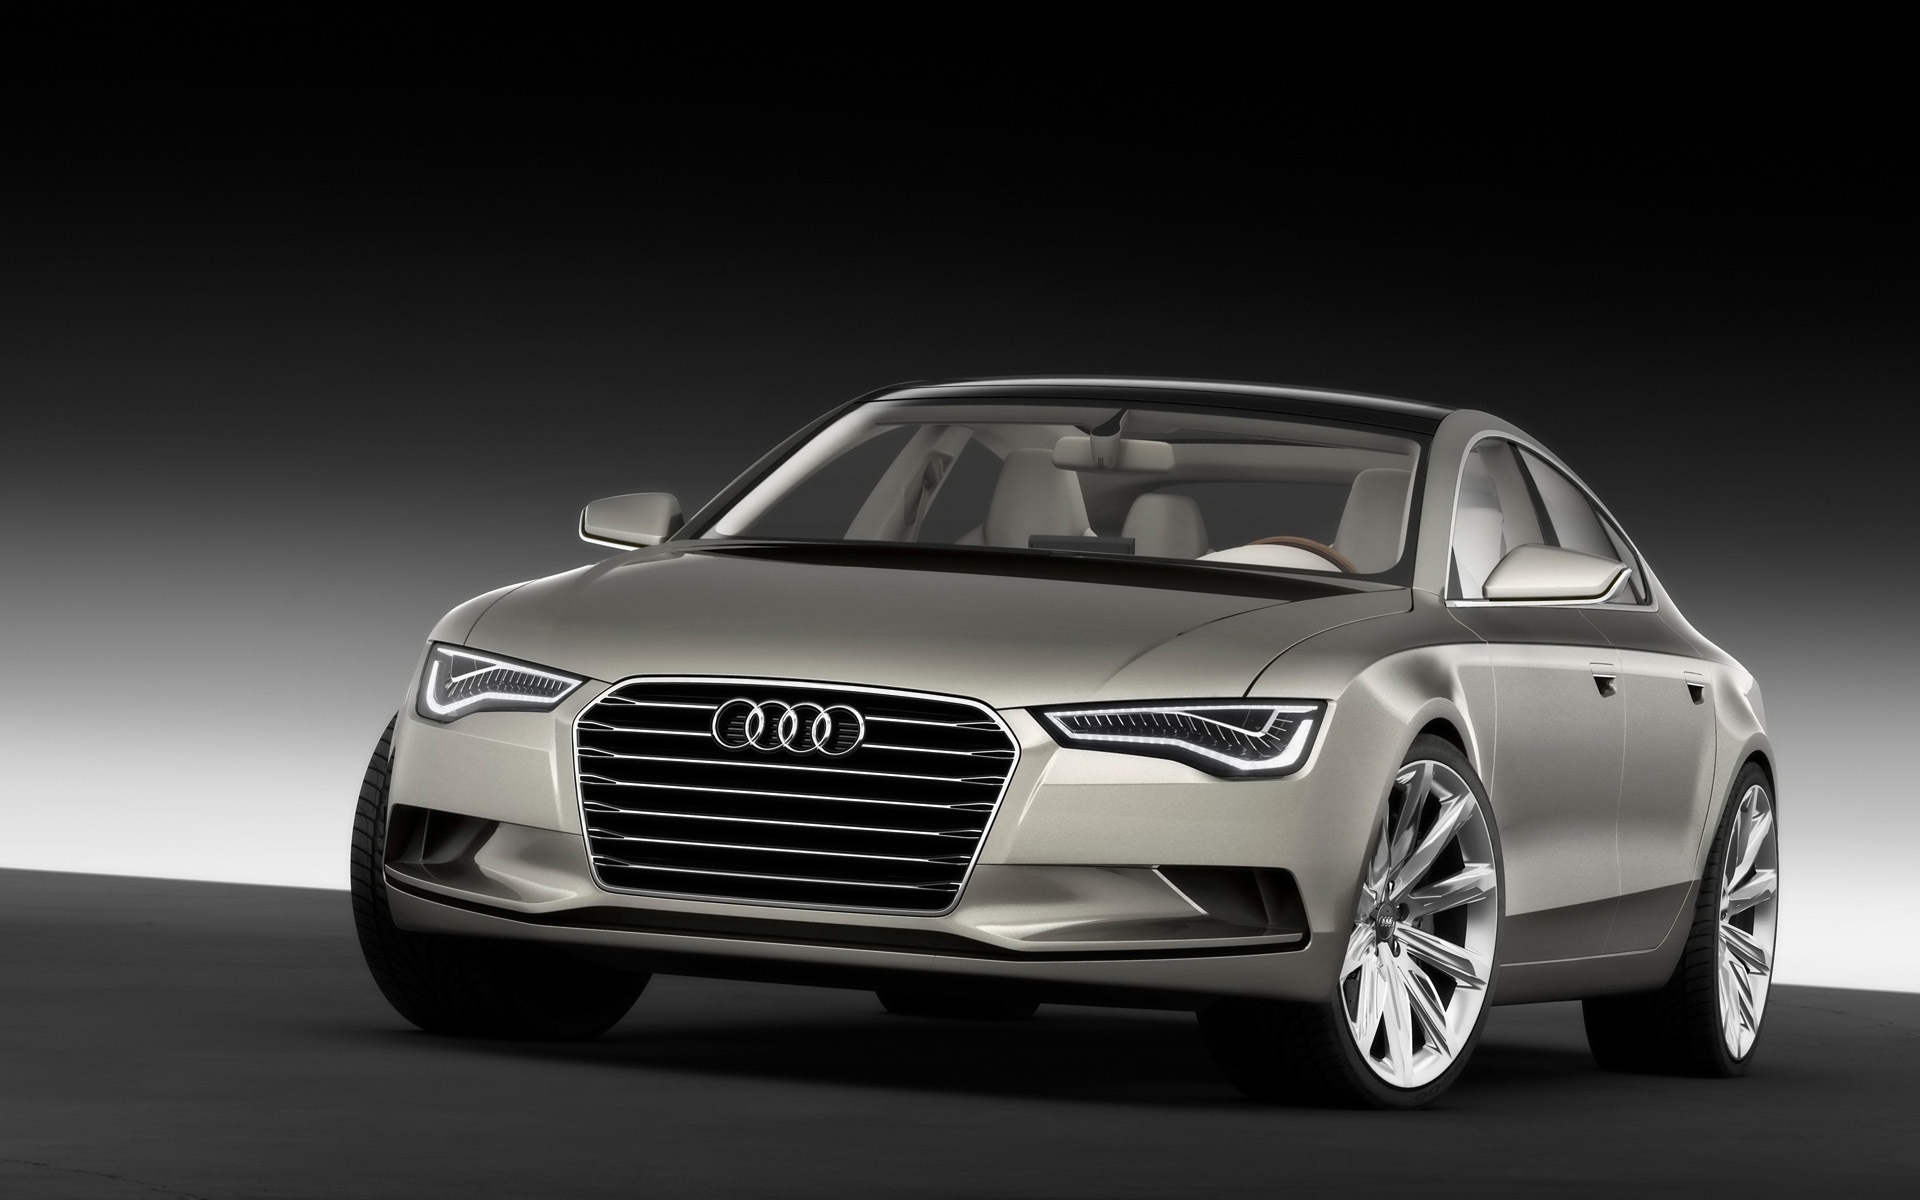 2009 Audi Sportback Concept - Front Angle for 1920 x 1200 widescreen resolution